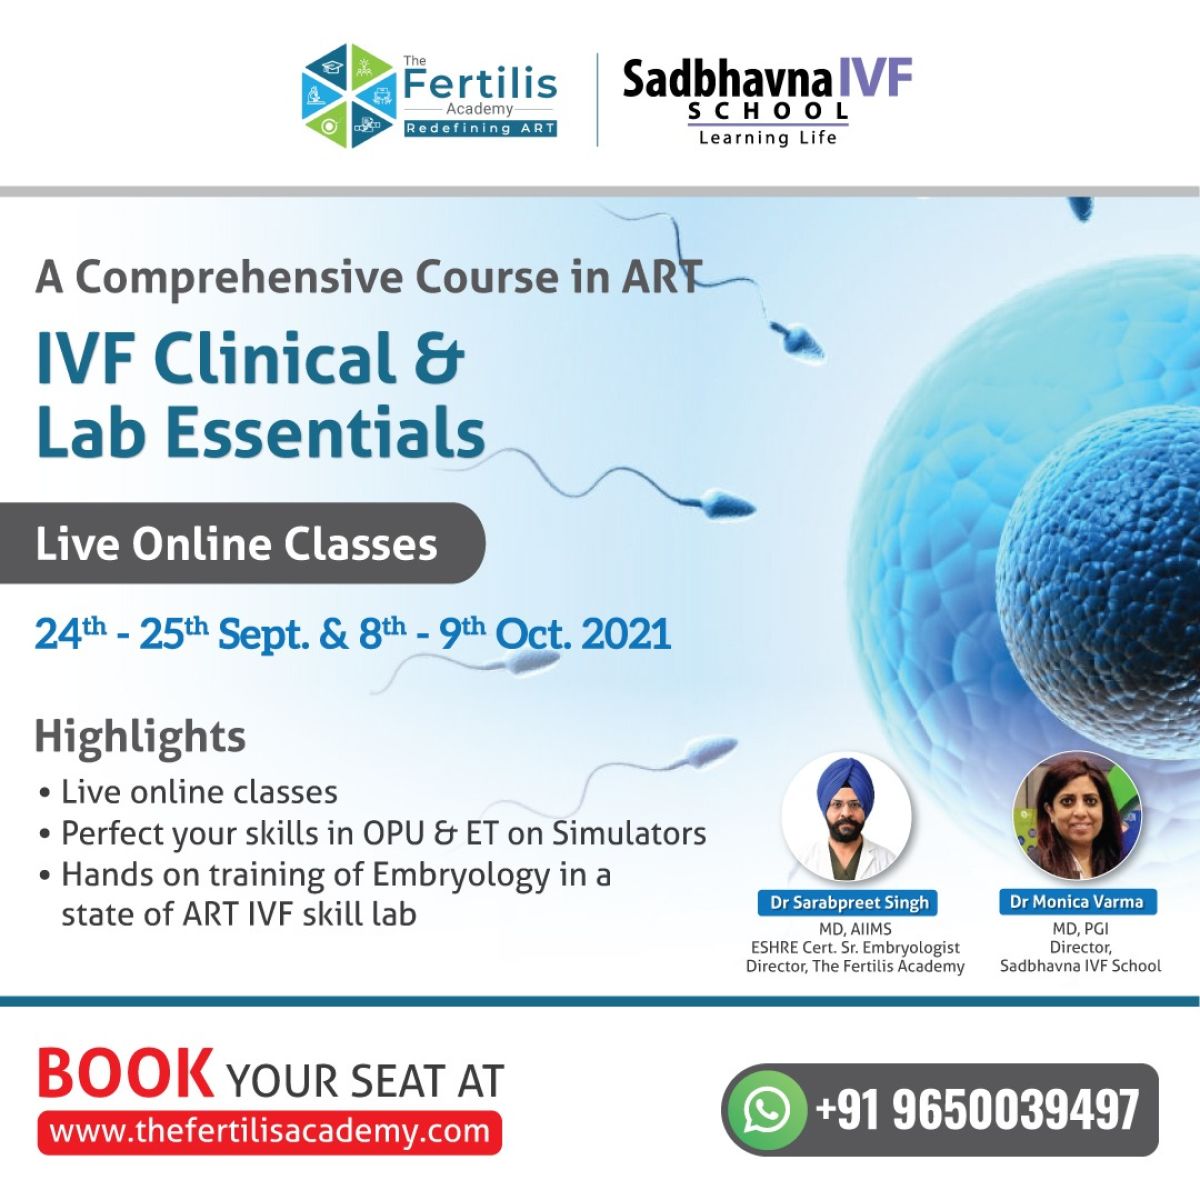 IVF Clinical and Lab Essentials: A Comprehensive Course